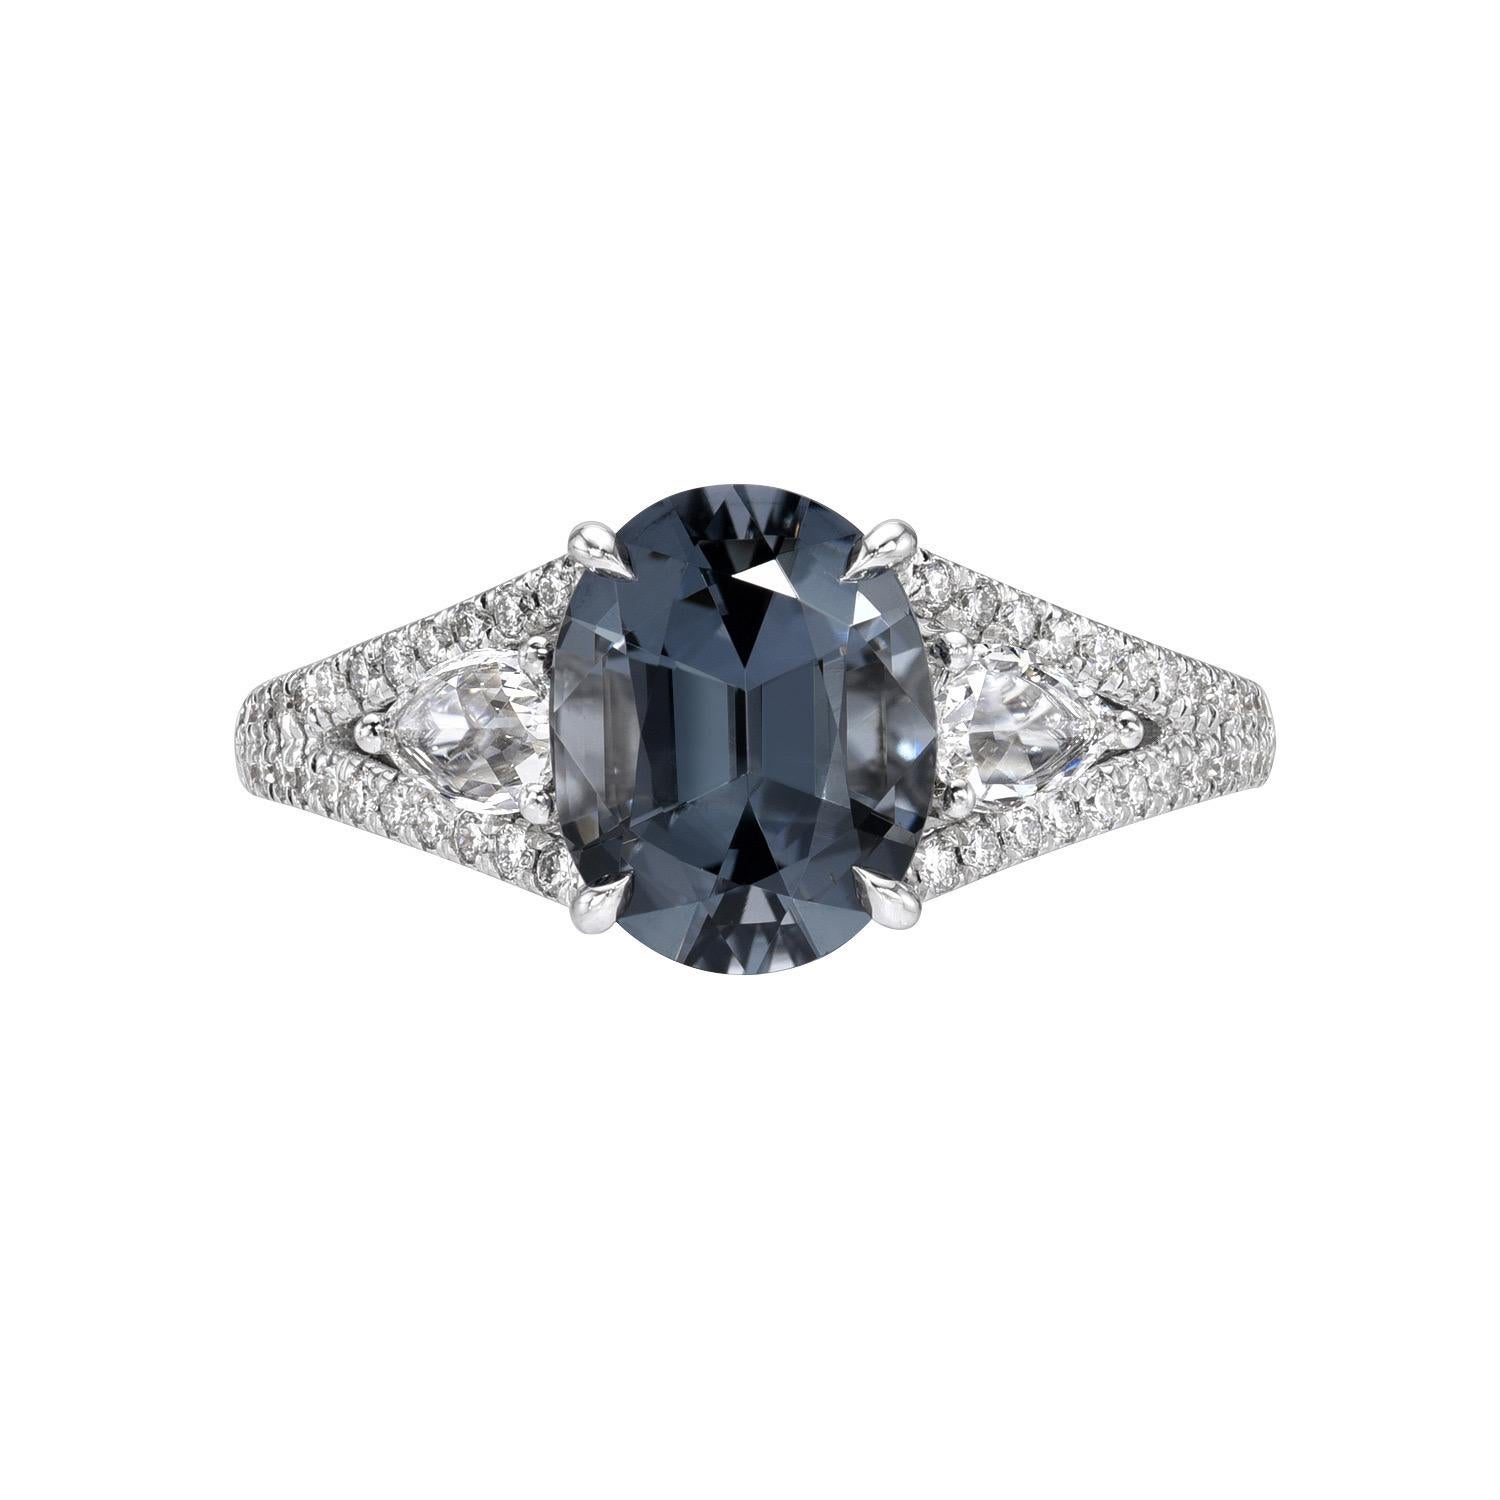 Victorian Grey Spinel Ring Oval 2.49 Carats For Sale